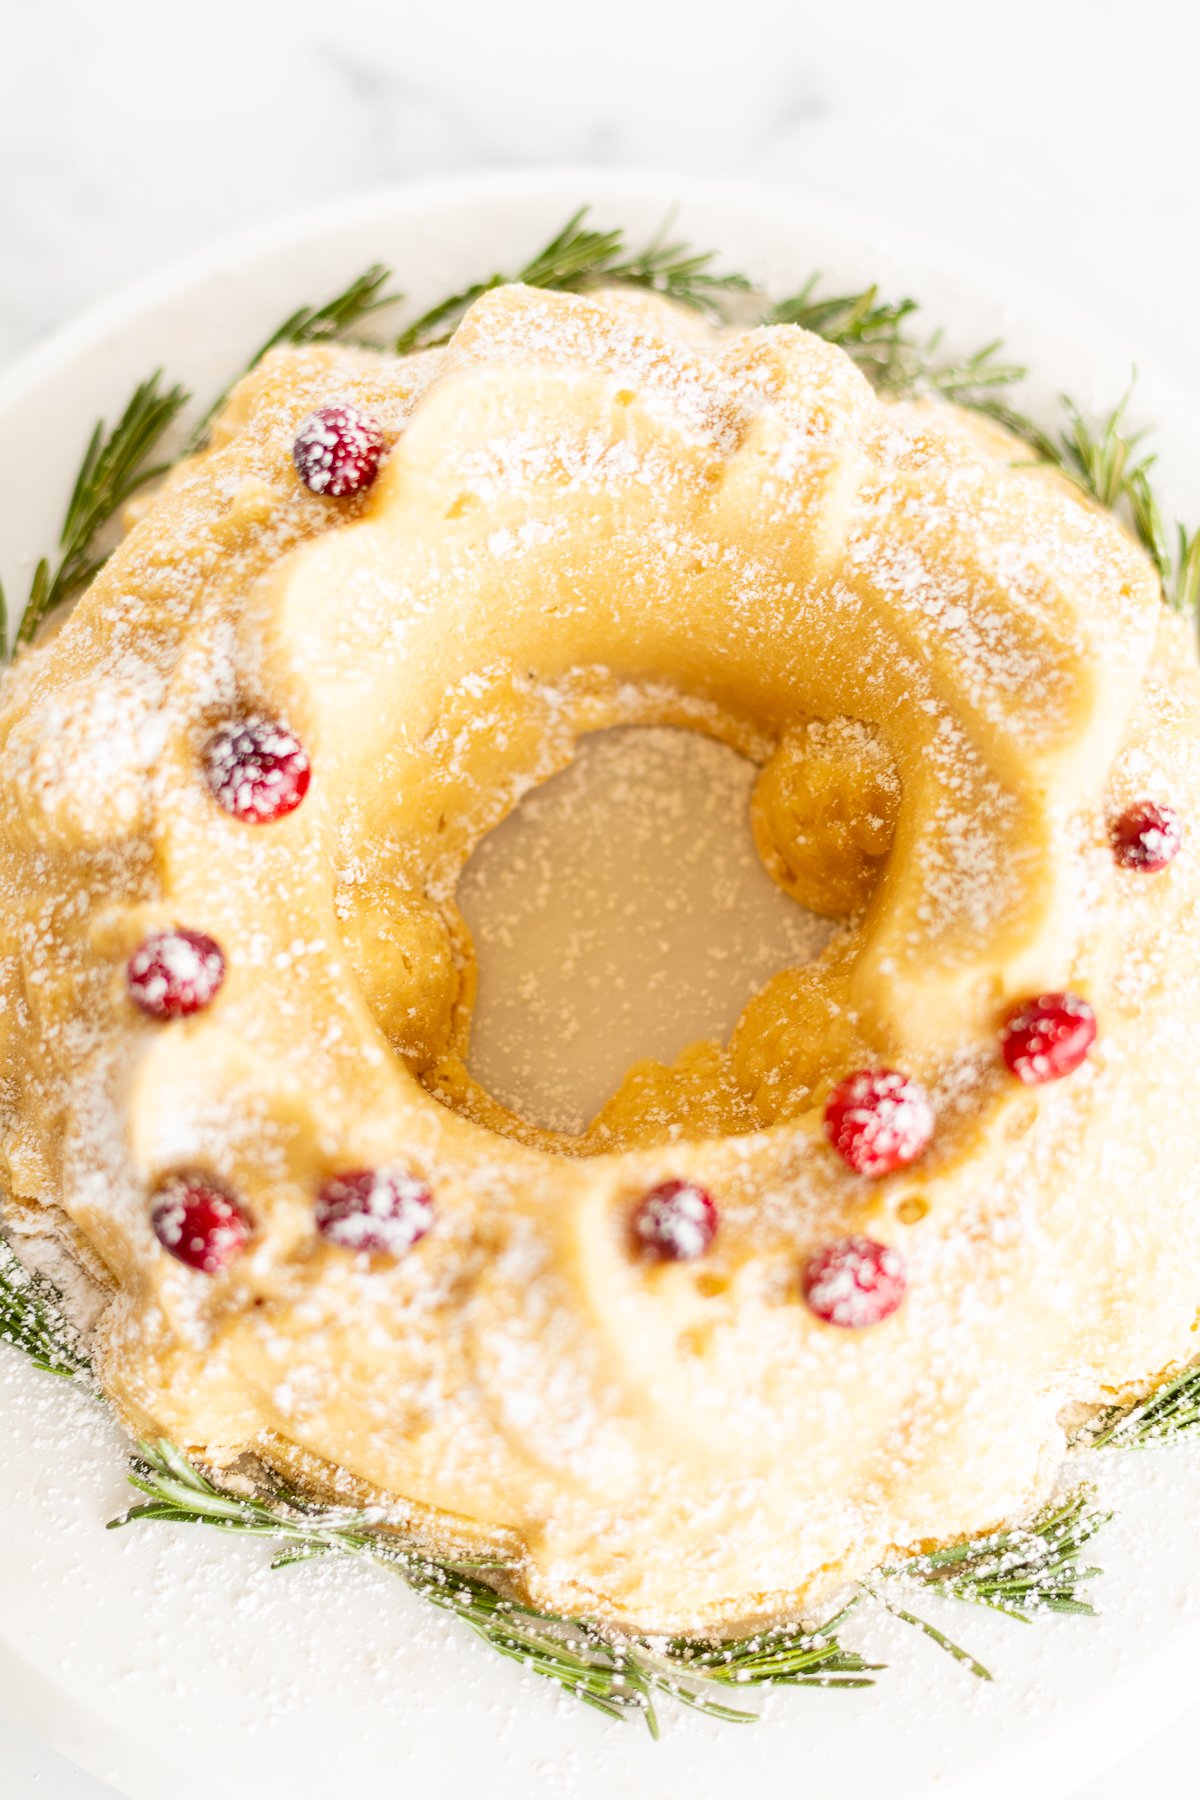 A Christmas bundt cake topped with cranberries and powdered sugar.